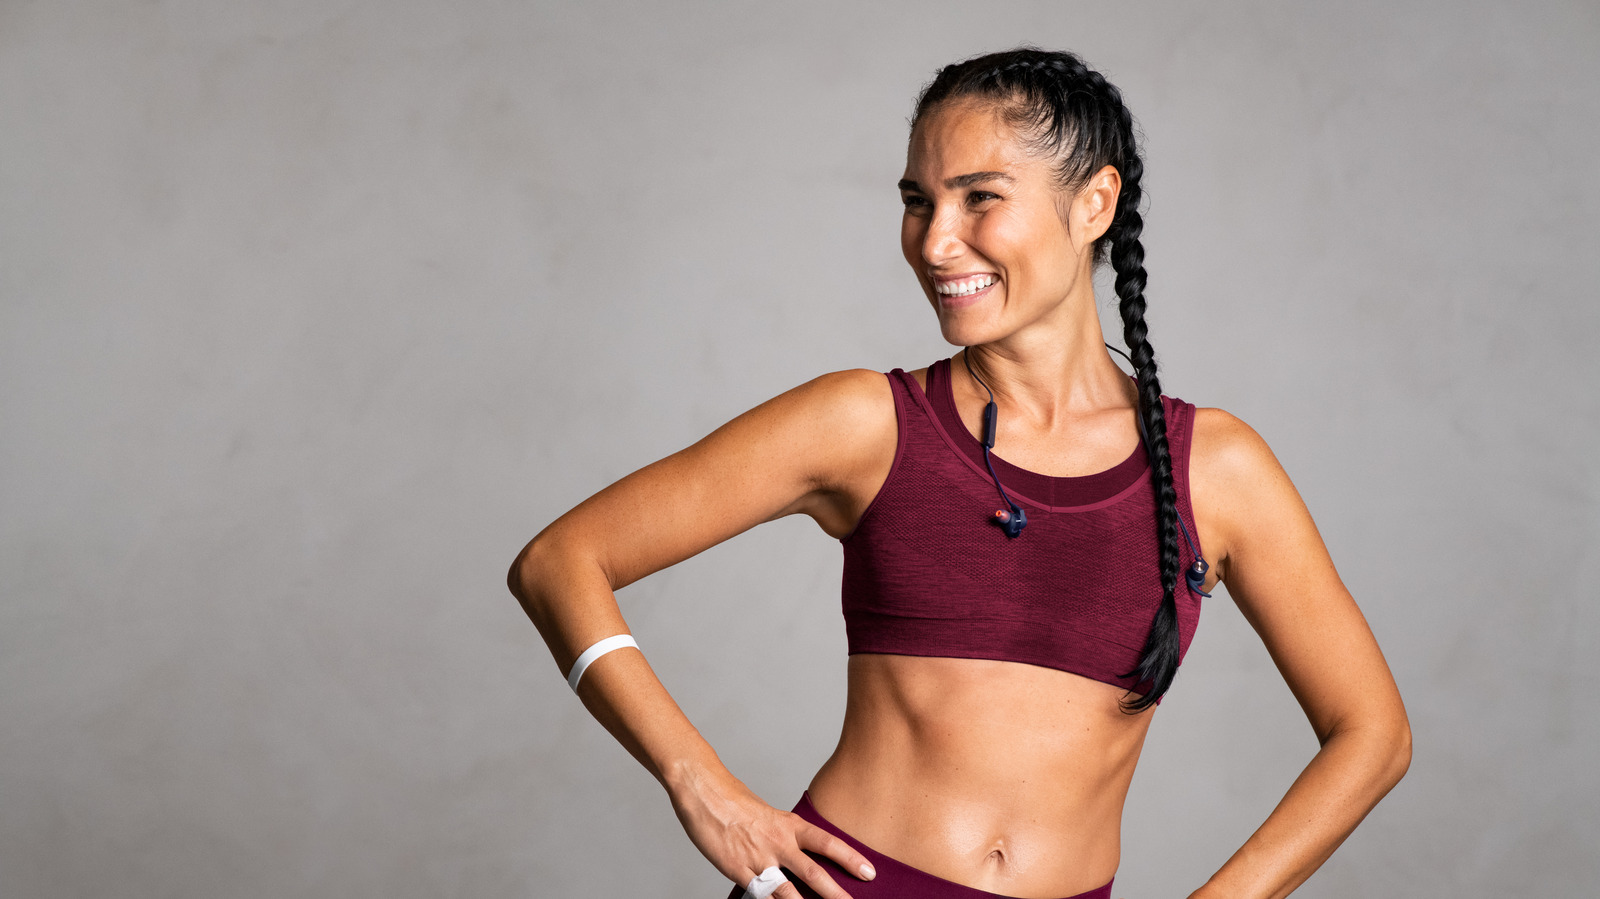 Here's How To Choose The Right Sports Bra For You